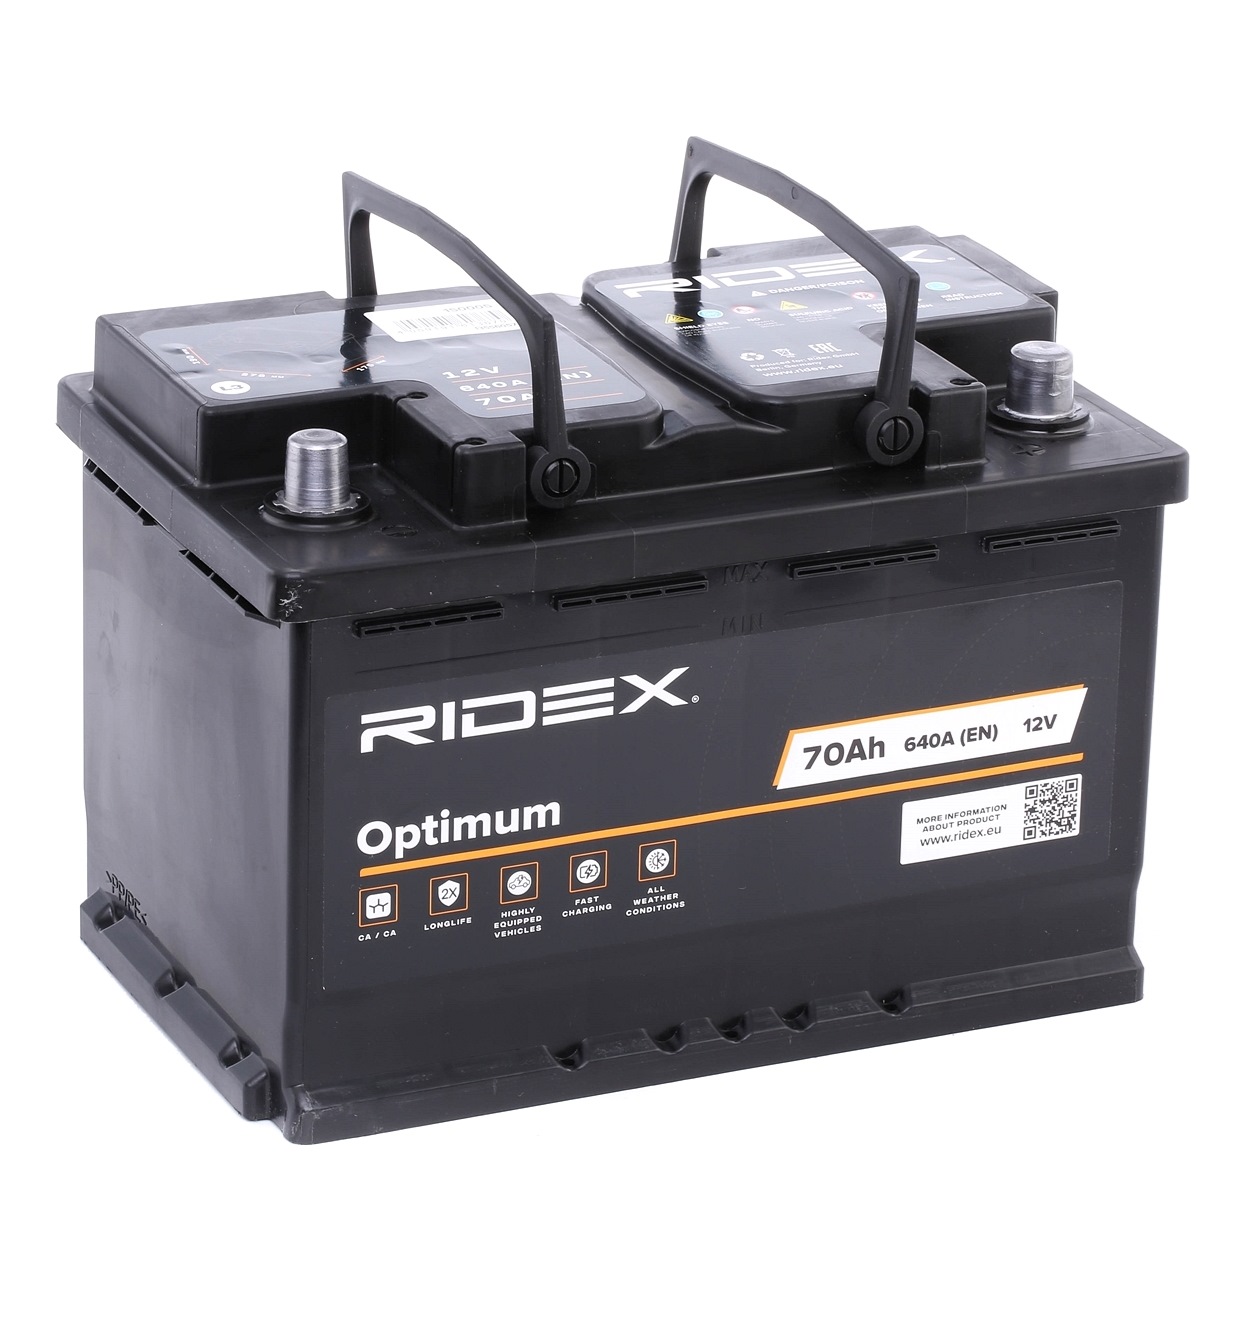 RIDEX 1S0005 Battery 12V 70Ah 640A B13 Lead-acid battery, without fill gauge, with handles